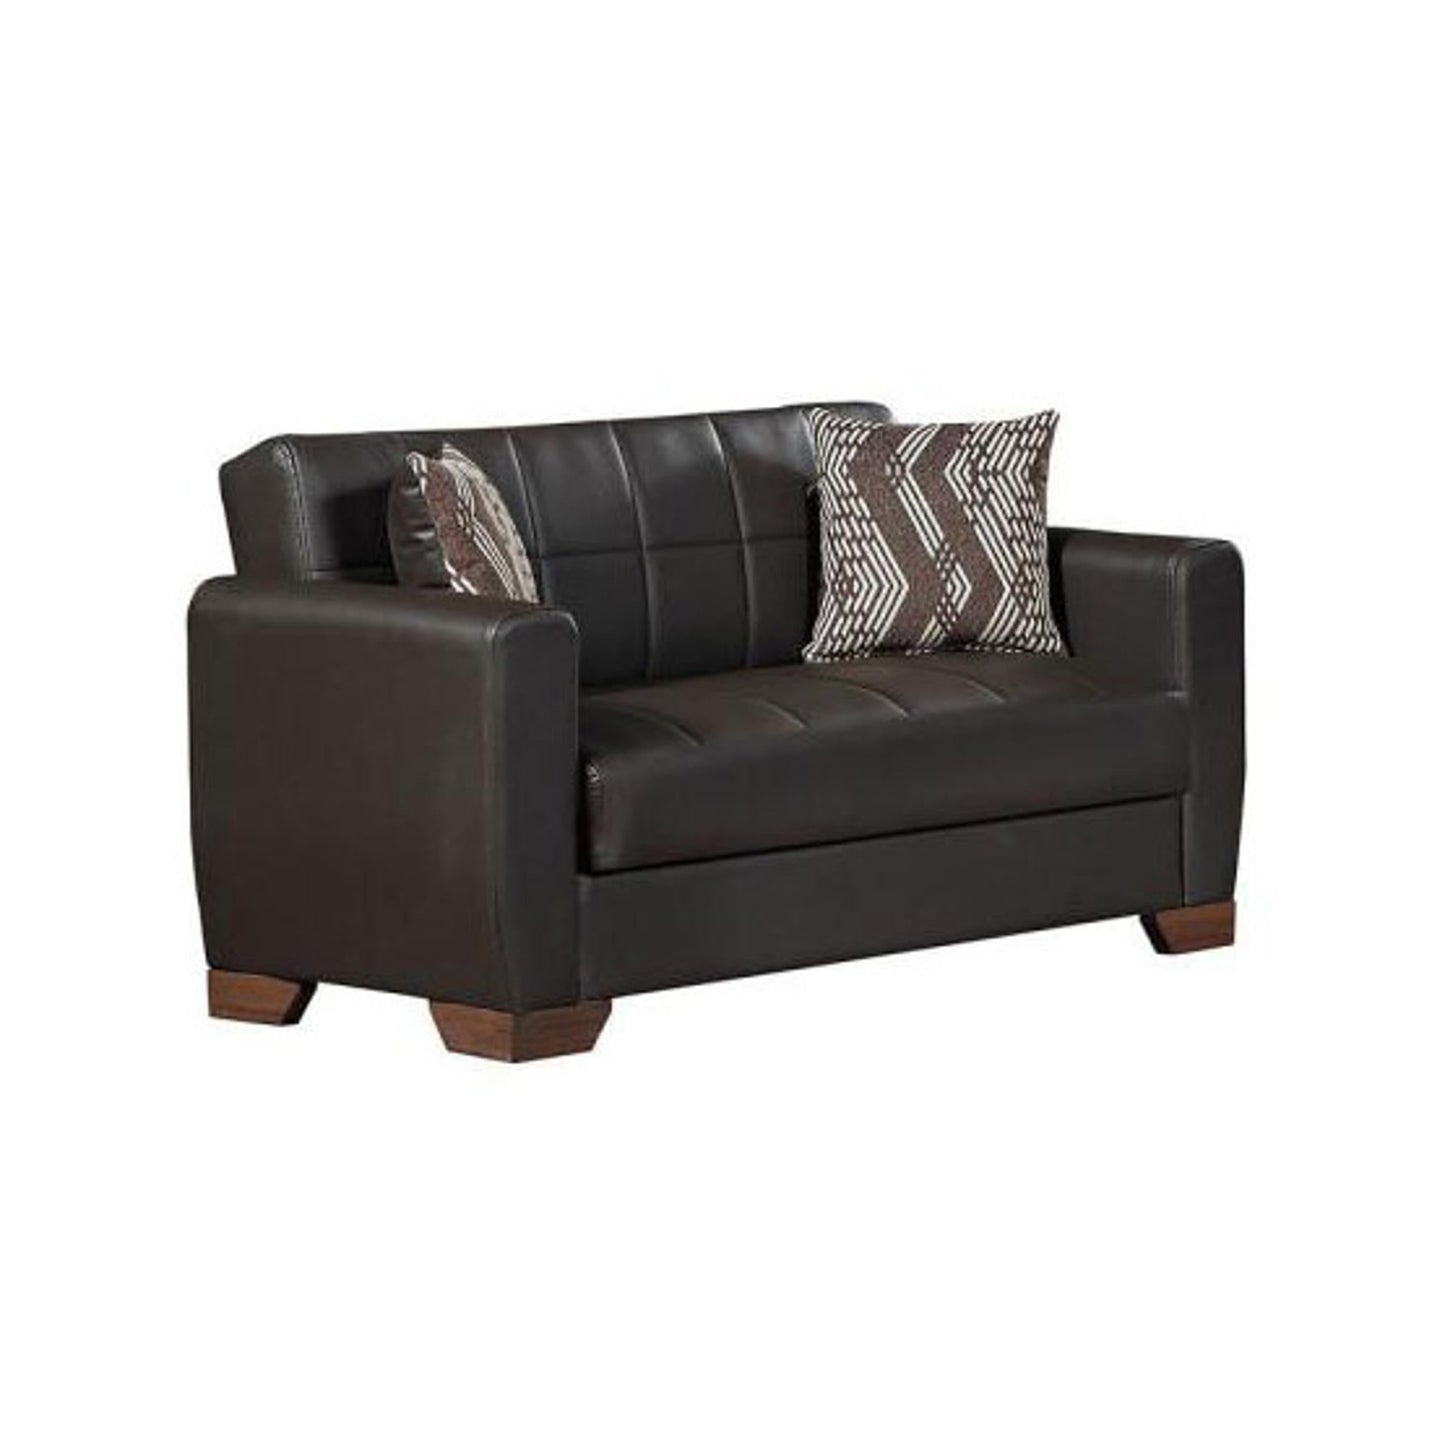 Barato Convertible Loveseat in Brown PU Leather